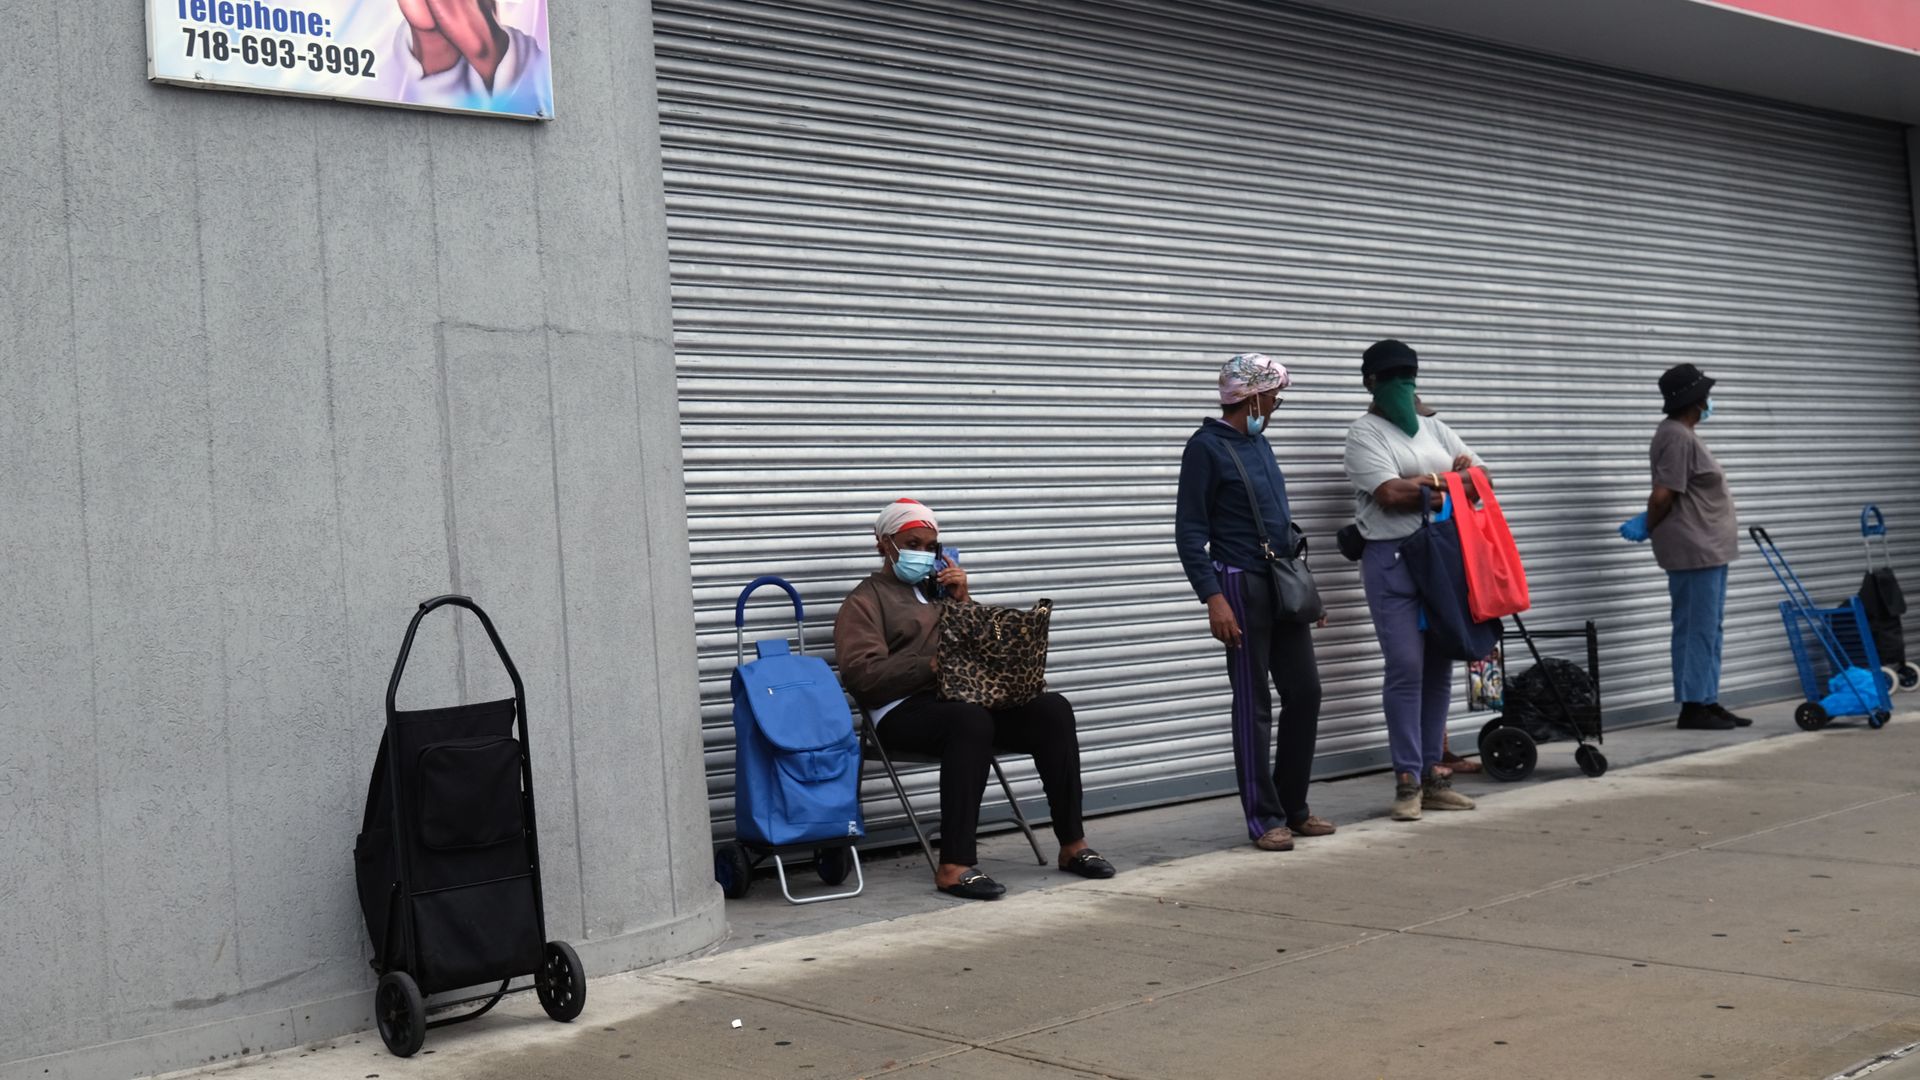  People wait in line at a food distribution site in a Brooklyn neighborhood 